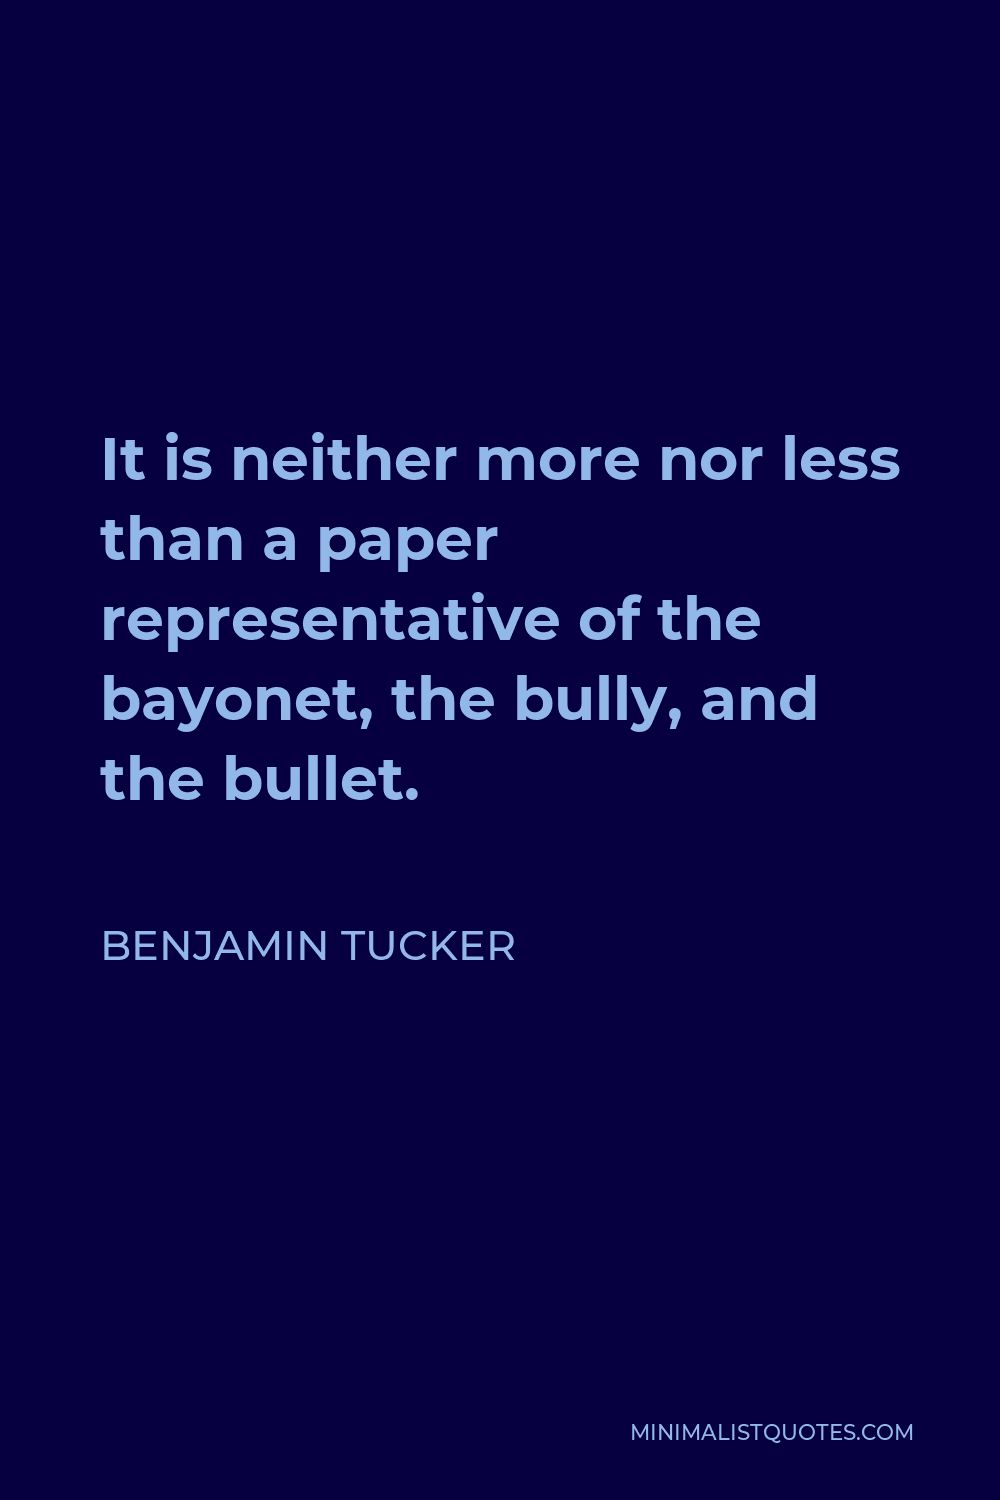 Benjamin Tucker Quote - It is neither more nor less than a paper representative of the bayonet, the bully, and the bullet.